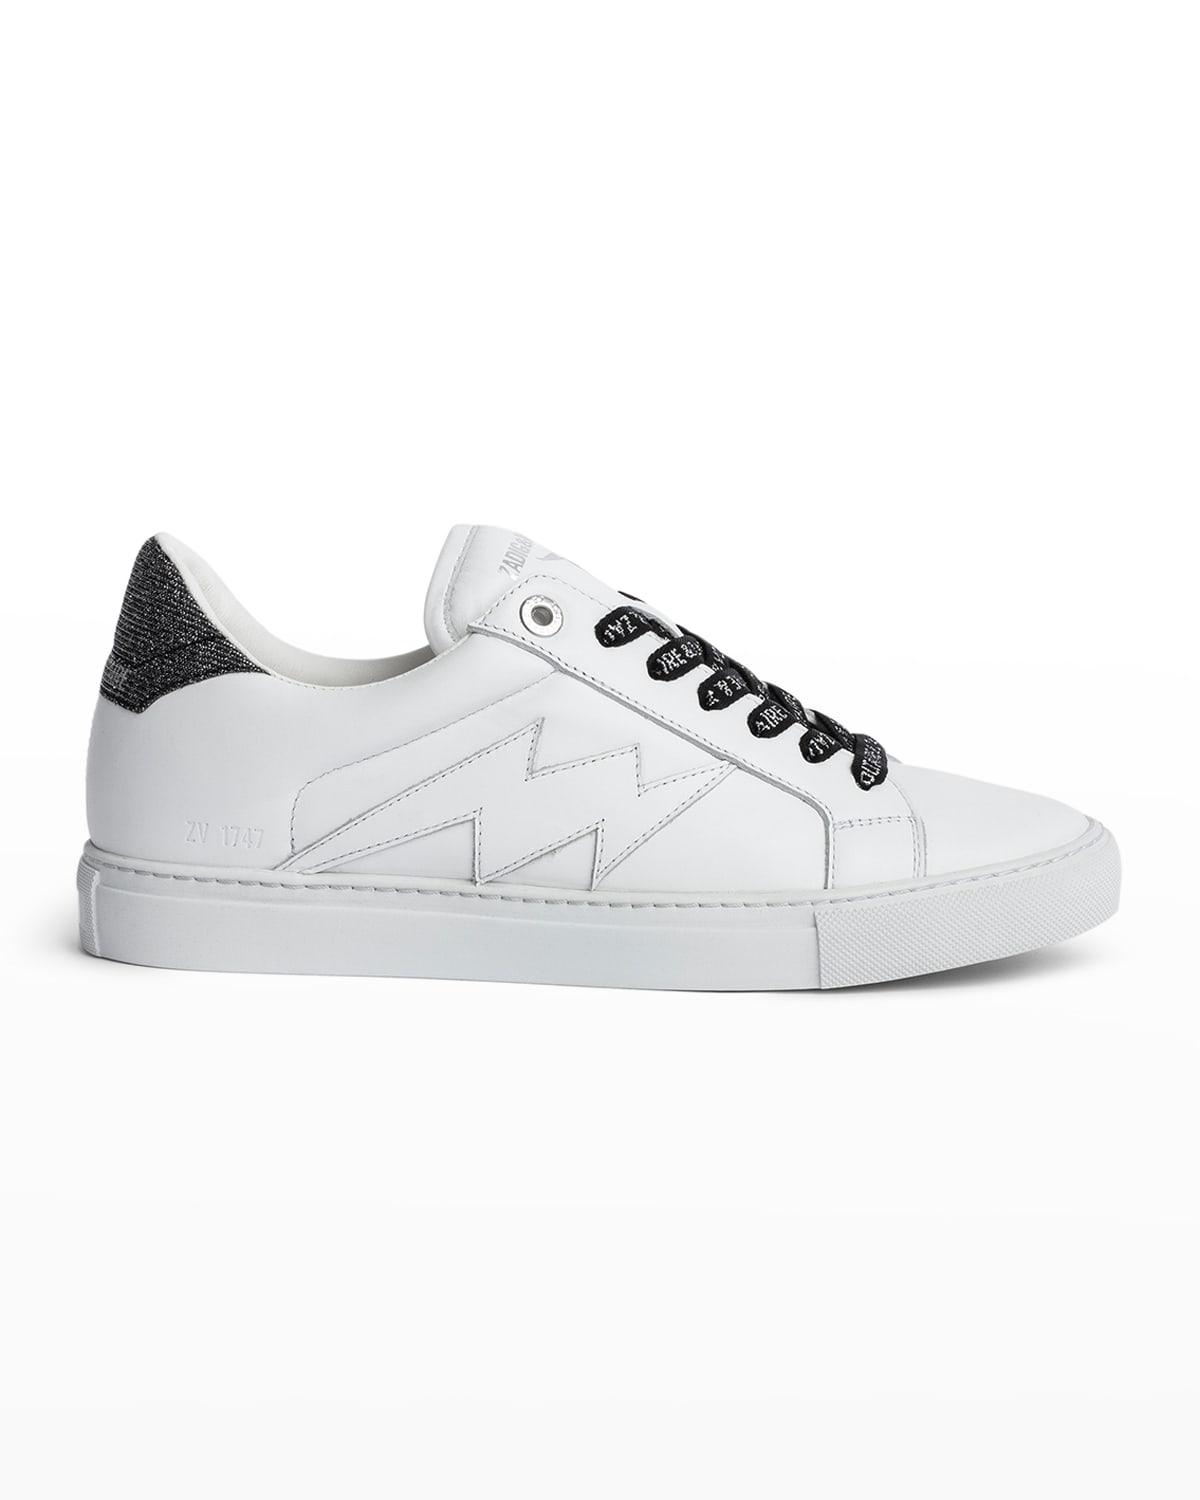 Zadig & Voltaire Flash Calfskin Low-top Sneakers in White | Lyst